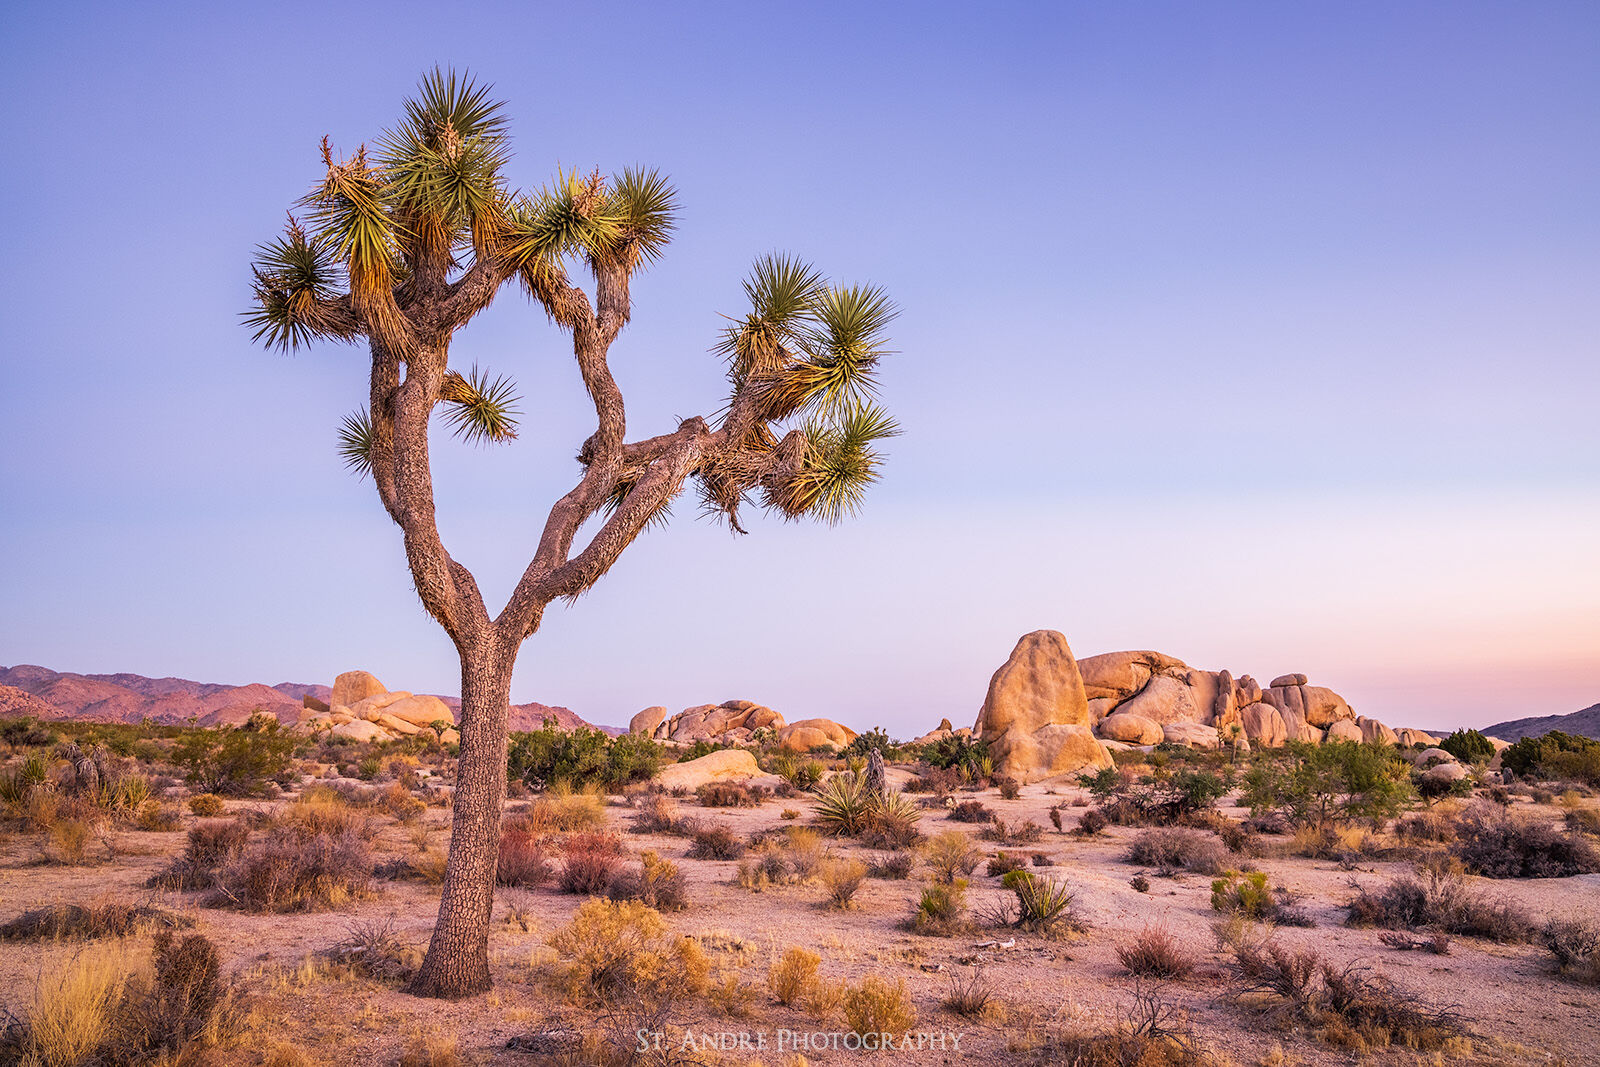 A lone Joshua Tree stands in a field of desert plants and large granite stones stick out of the ground in the distance in Joshua Tree National Park